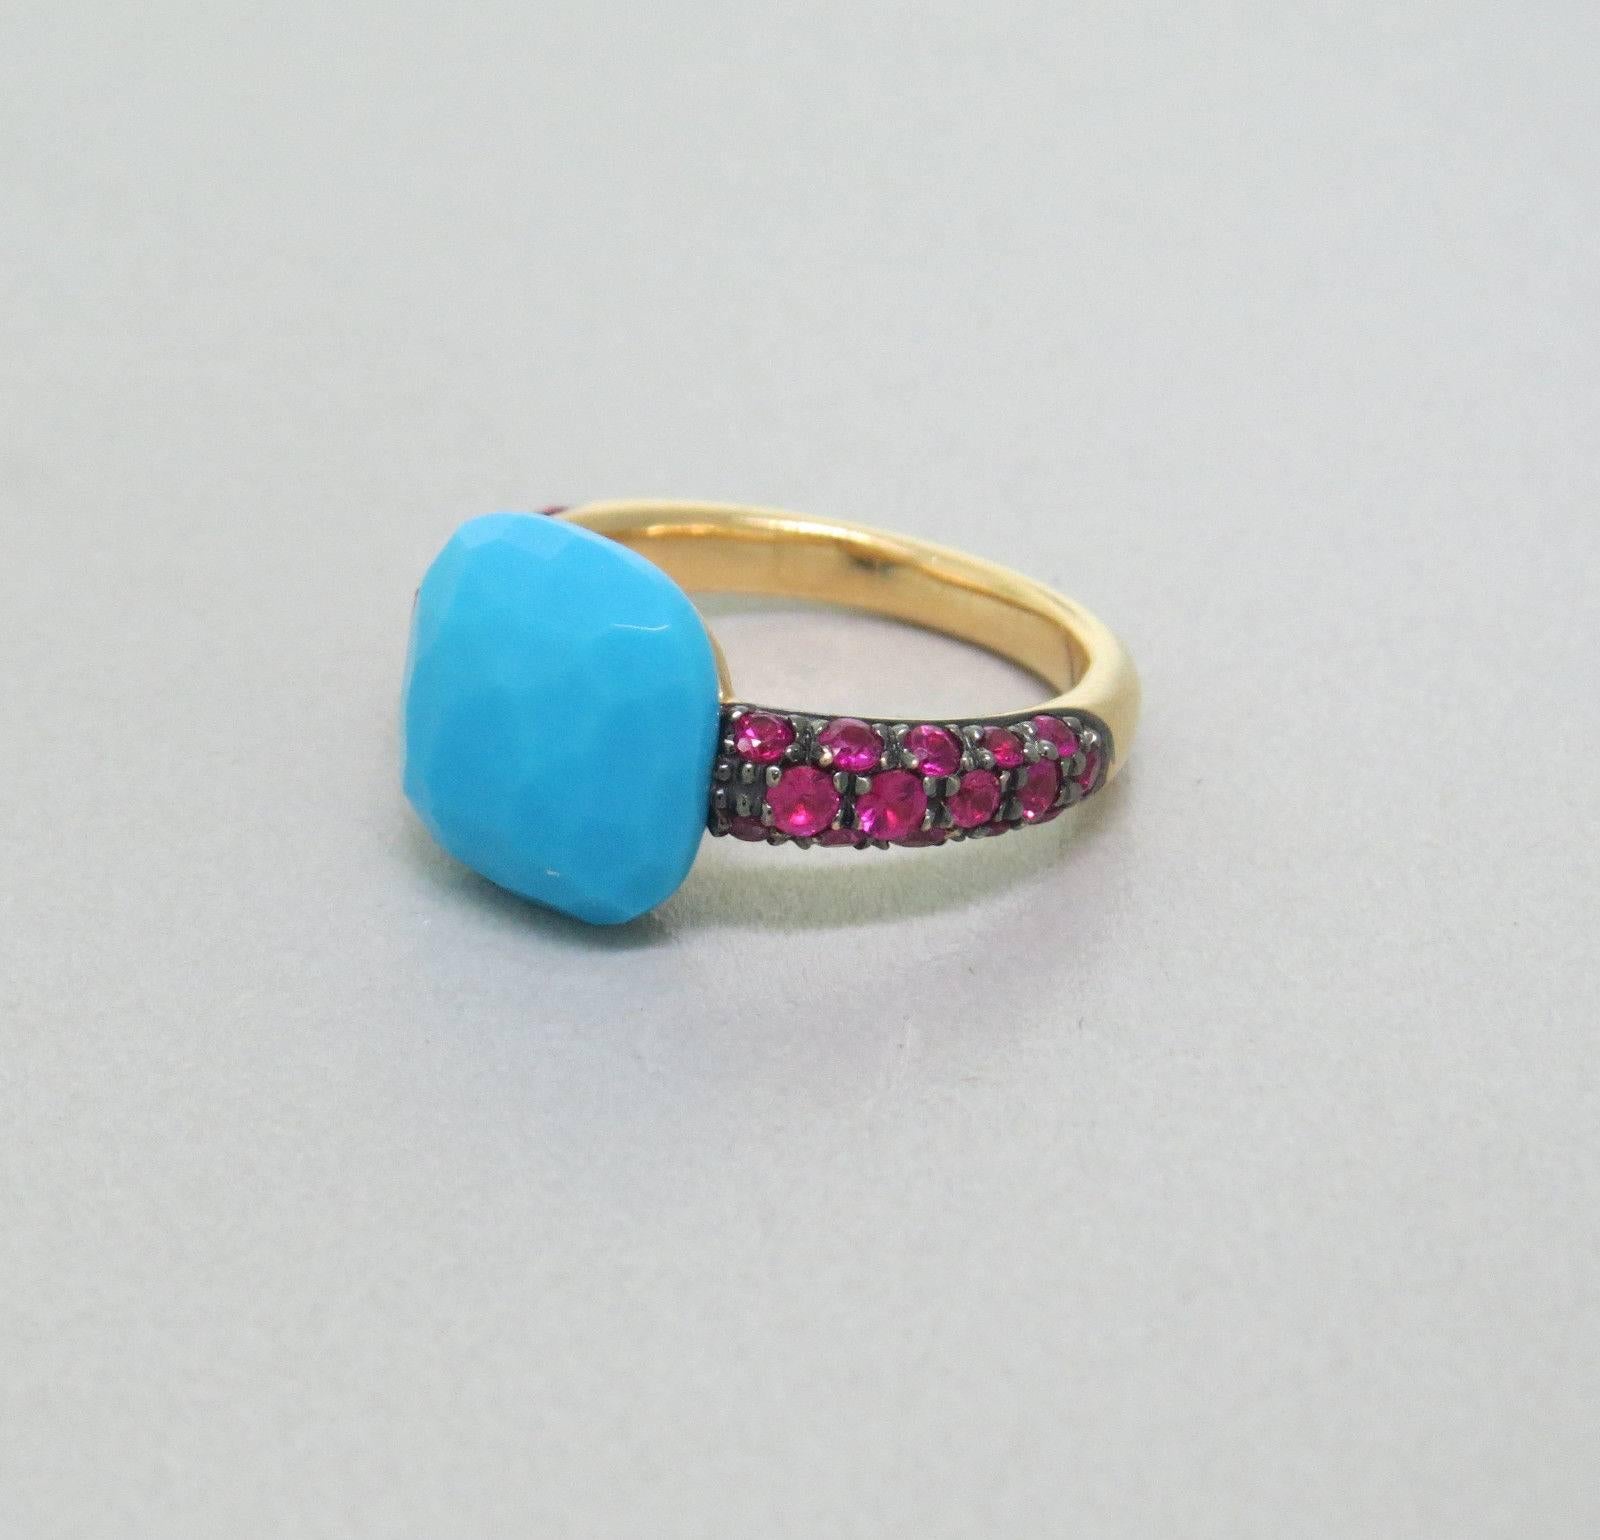 18k rose gold Capri ring, designed by Pomellato, set with turquoise and rubies. Ring size - 3 3/4, ring top is 11mm x 11.5mm. Weight of the piece - 5.4 grams 